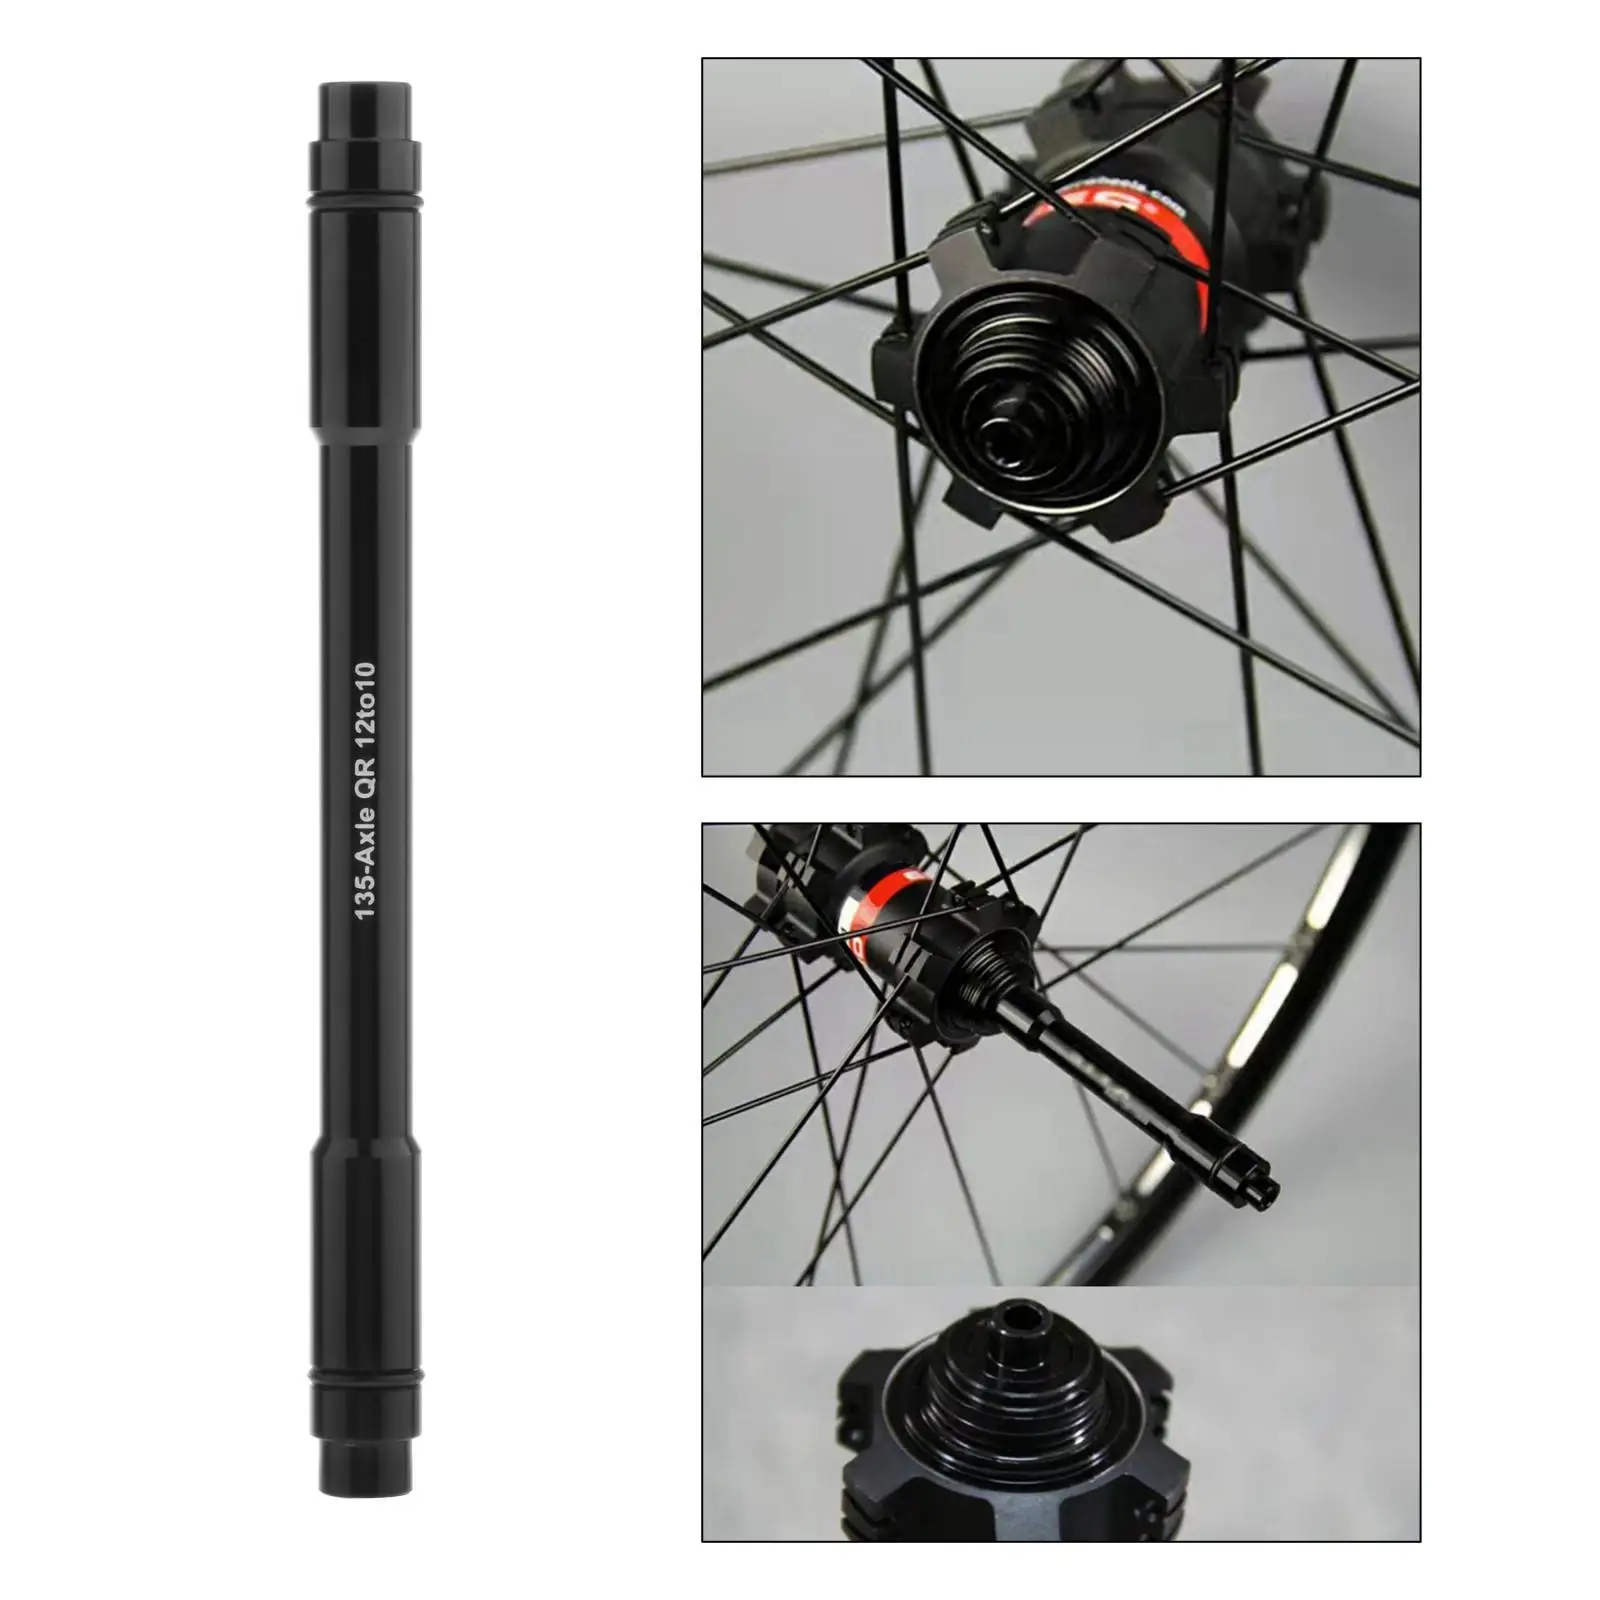 Ultralight  Thru Axle Adapter  Skewer Conversion, 12mm Thru Axle  to 10mm, Features High Strength, Resistant to Abrasion